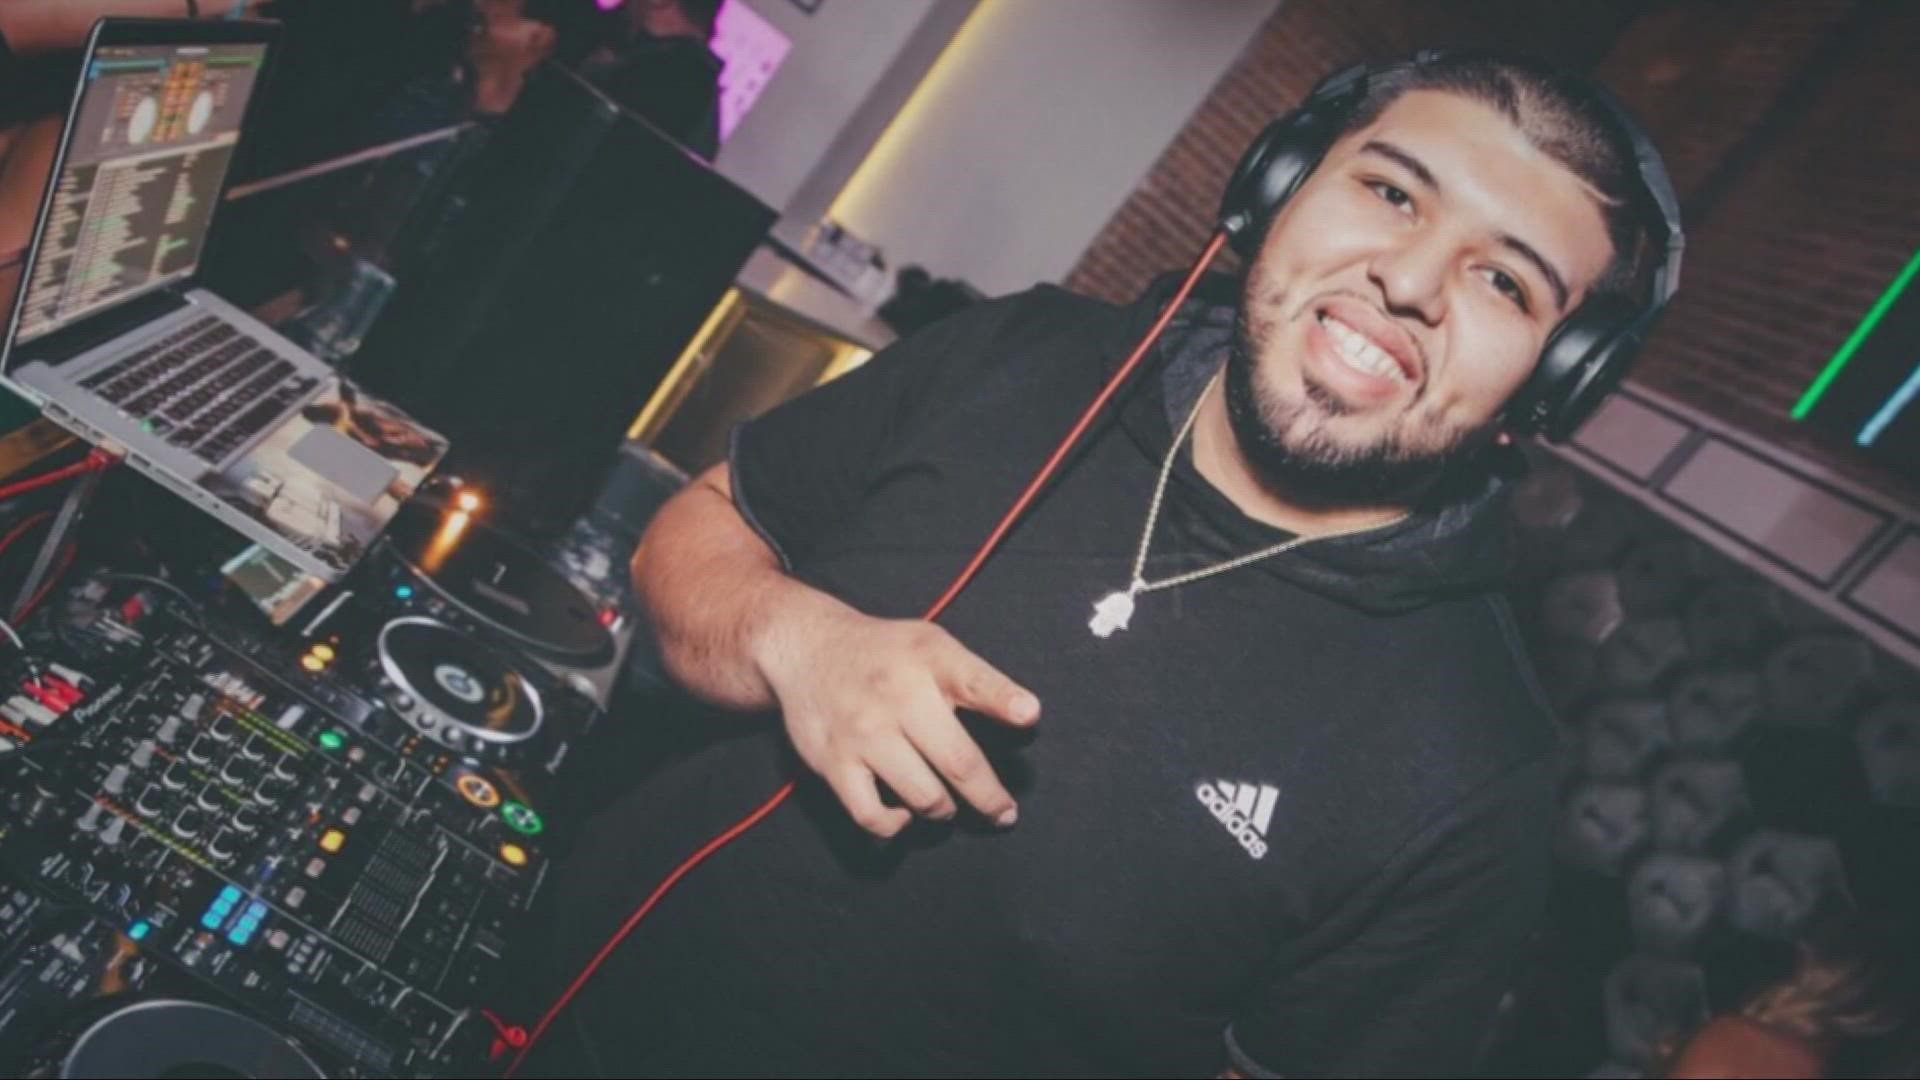 6 months later, community members are reflecting on the life of DJ Gio, a Sacramento DJ, after he was robbed and killed.